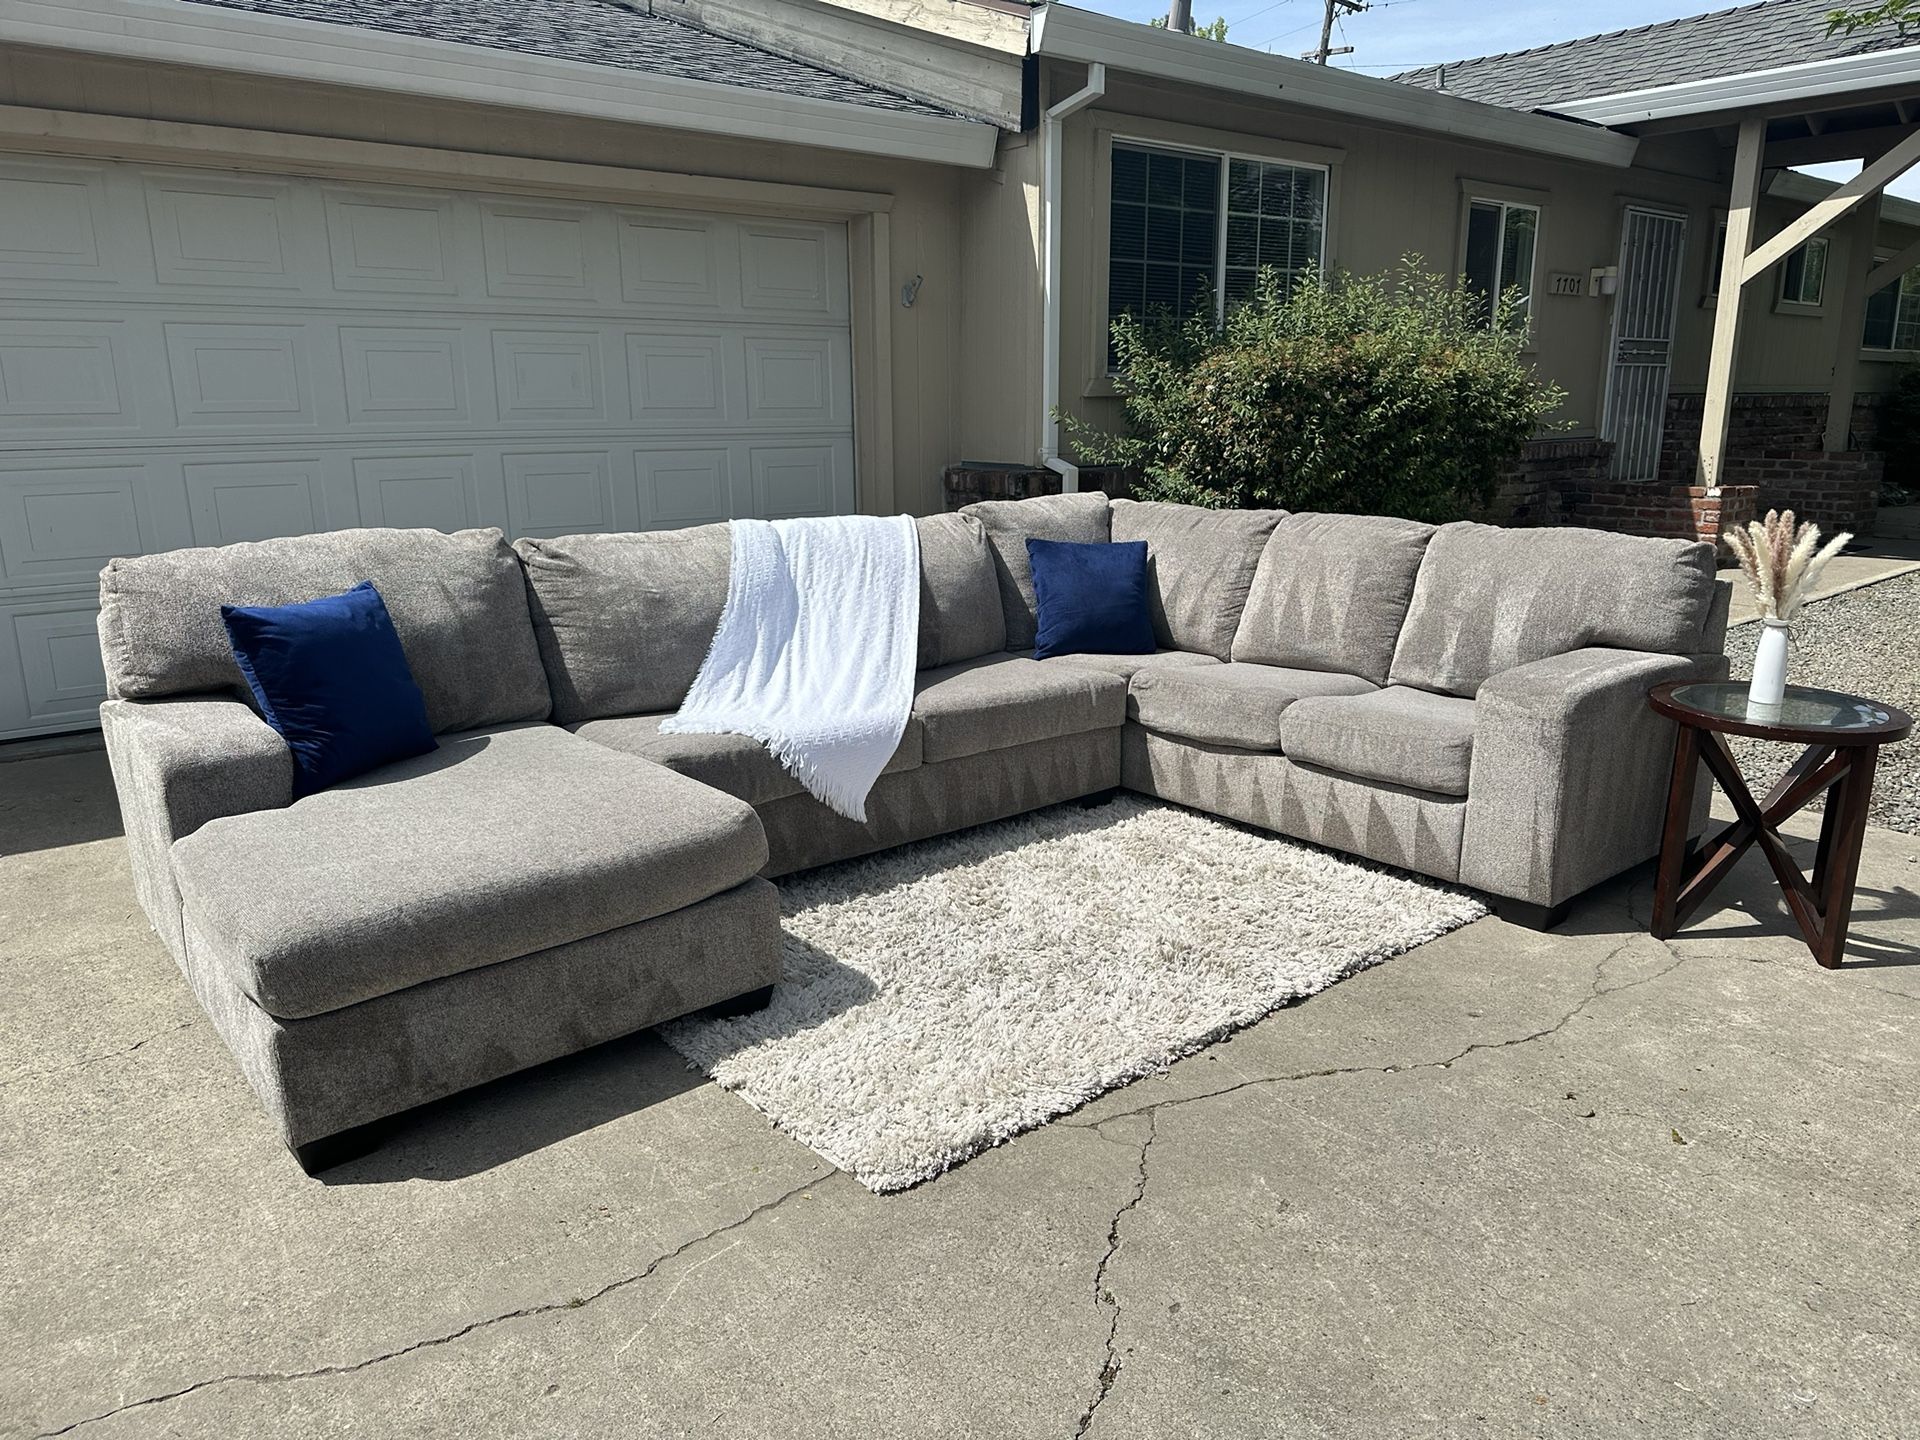 Free delivery Ashley Furniture gray U-shaped sectional couch retails $1600